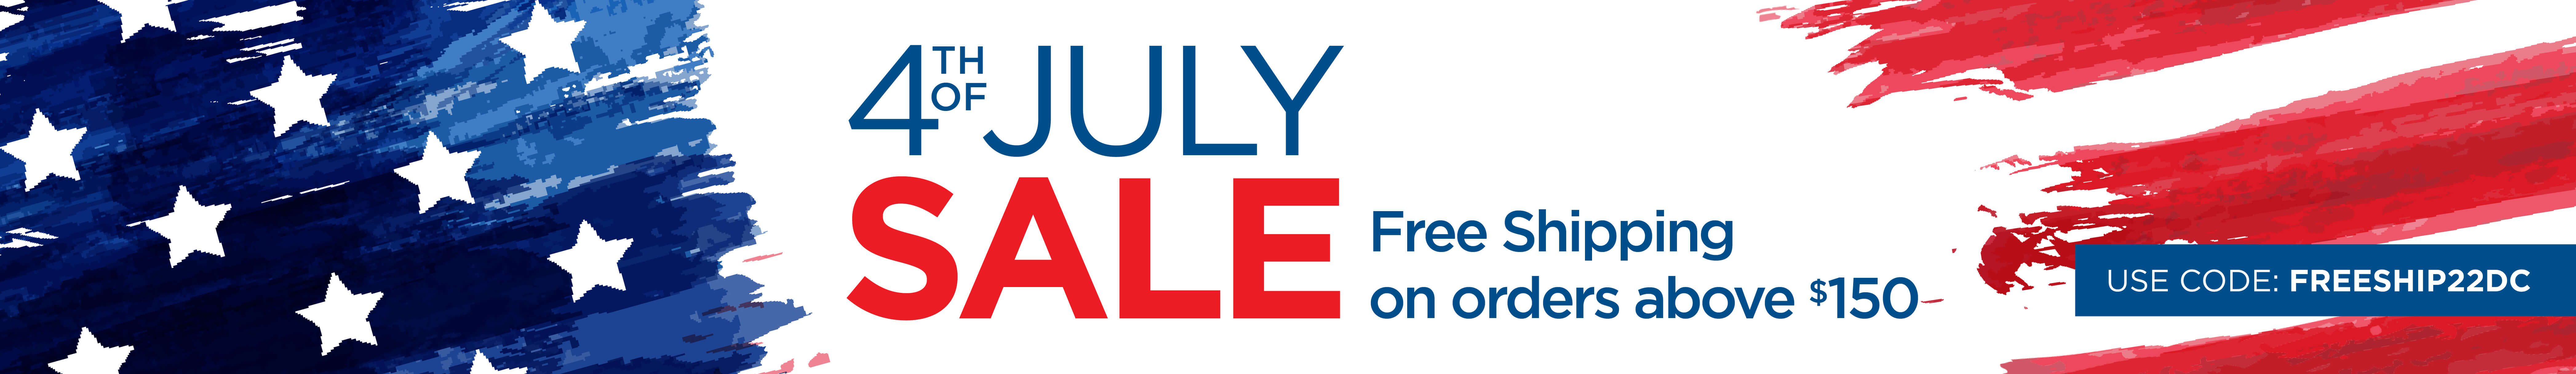 Fourth of July Sale - Free Shipping on Orders Over $150